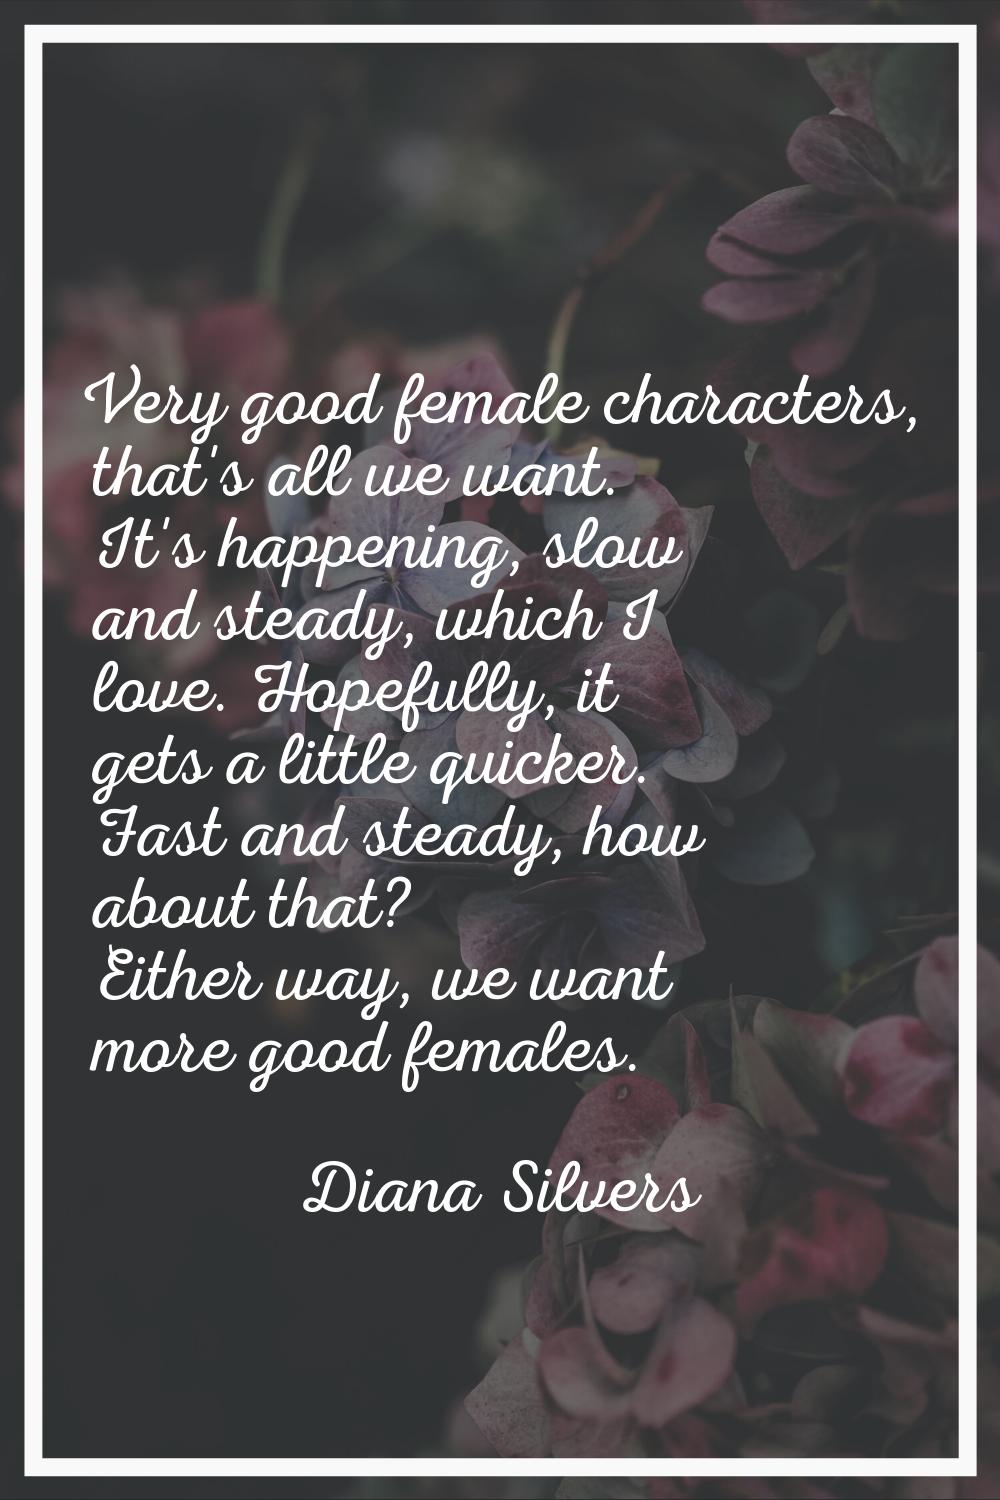 Very good female characters, that's all we want. It's happening, slow and steady, which I love. Hop